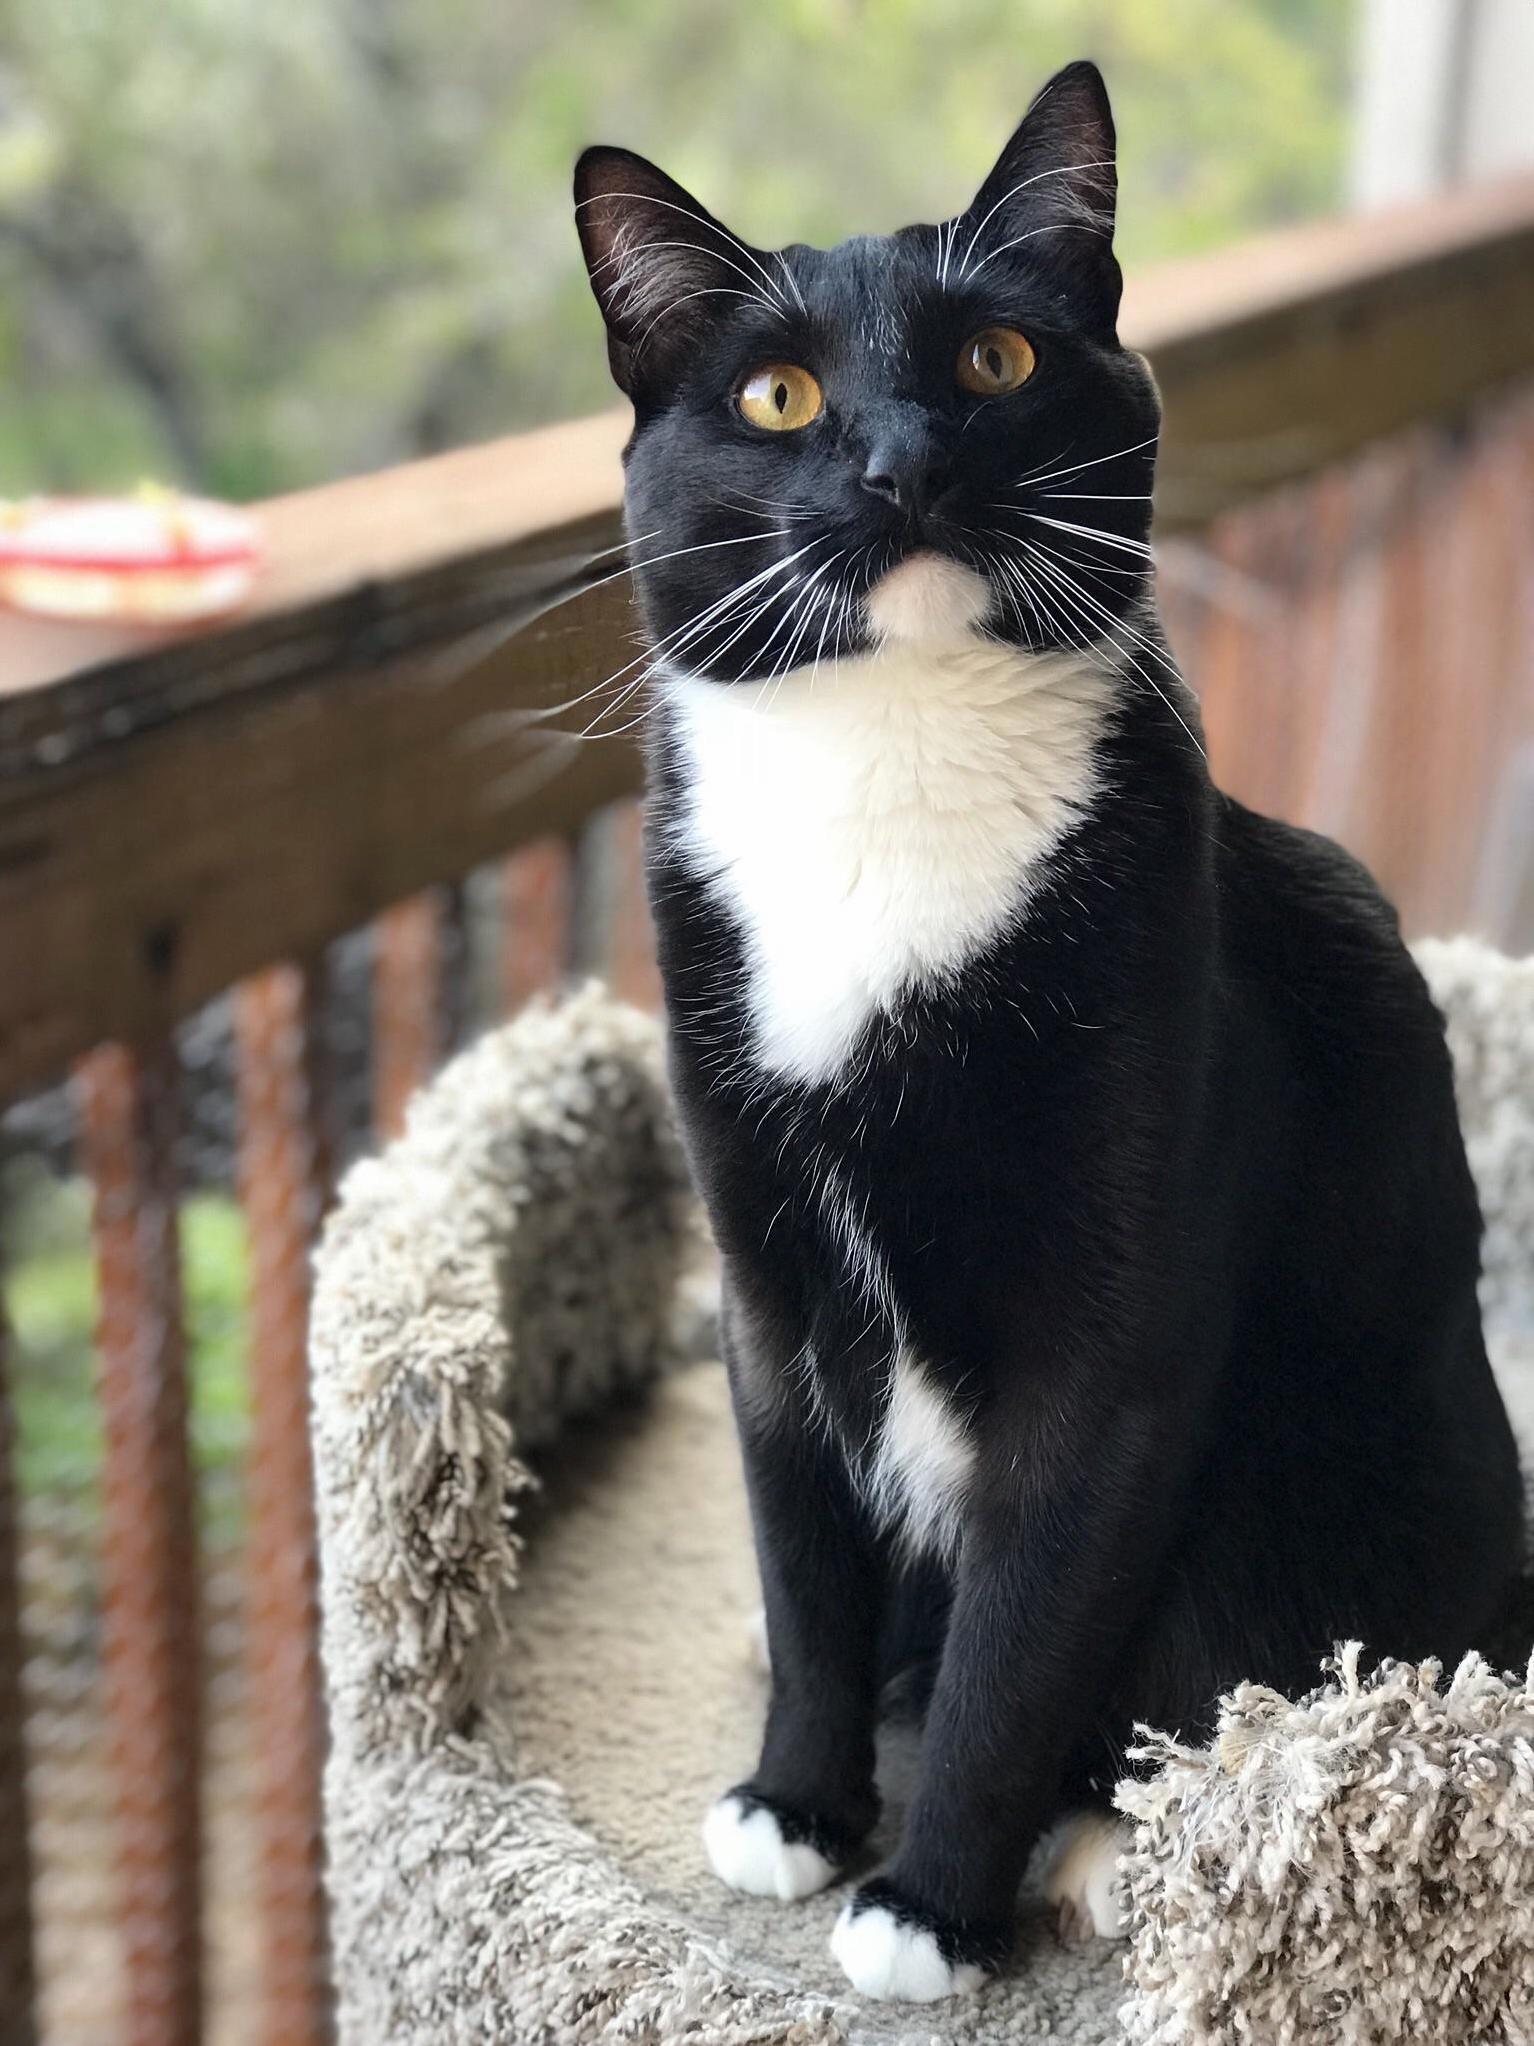 I spent less than to turn my deck into a catio, and have one happy cat as a result!